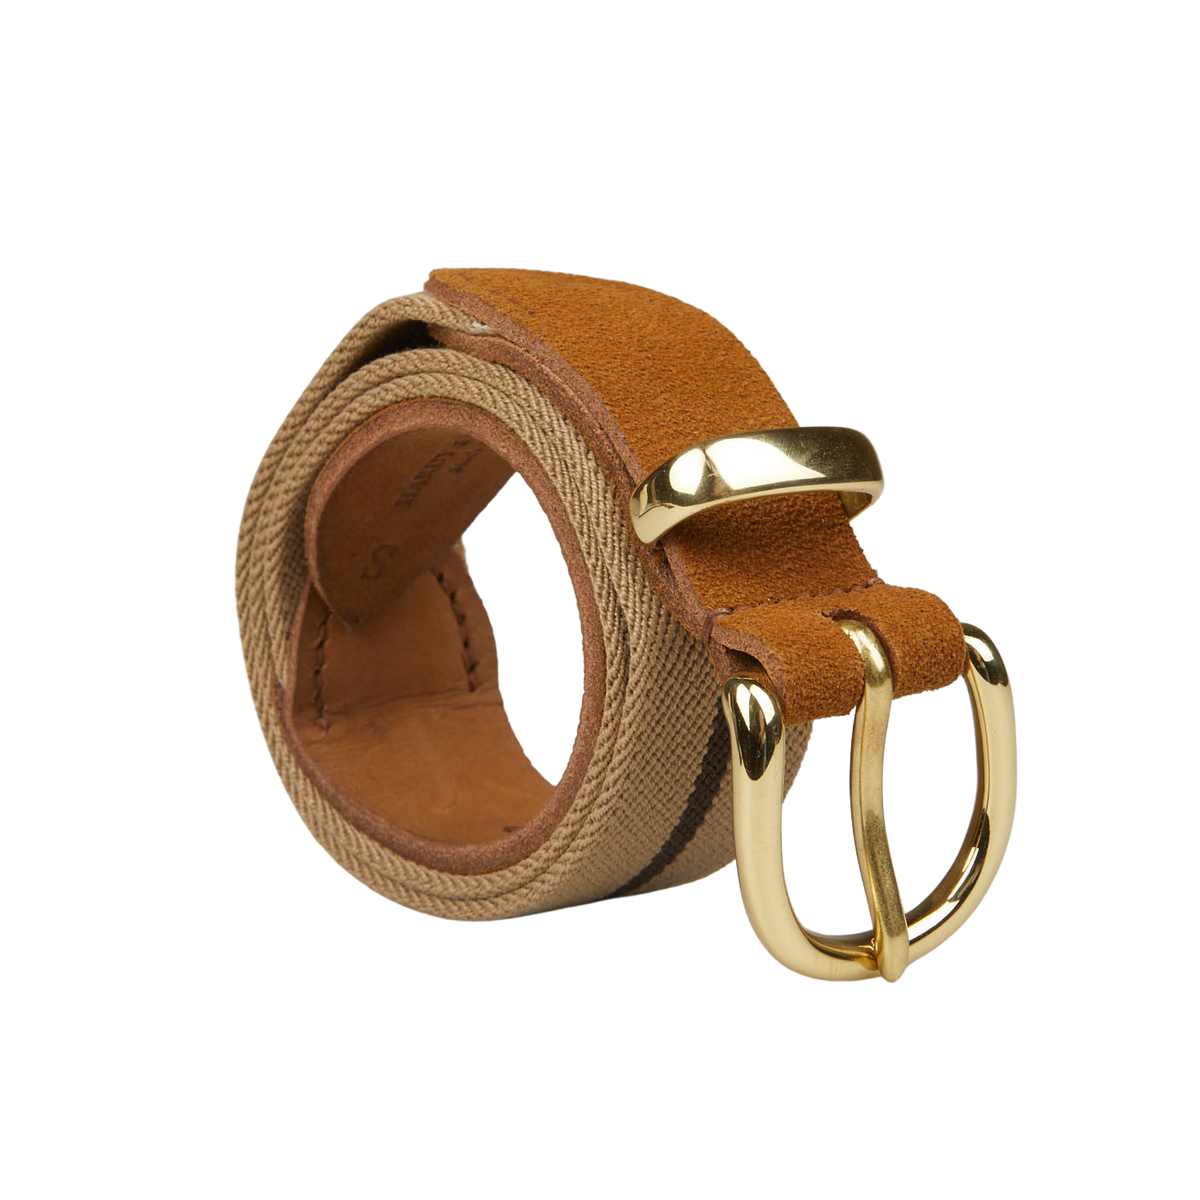 A Beige Brown Striped Canvas Cognac Suede 35mm Belt with a gold buckle by Hardy & Parsons.